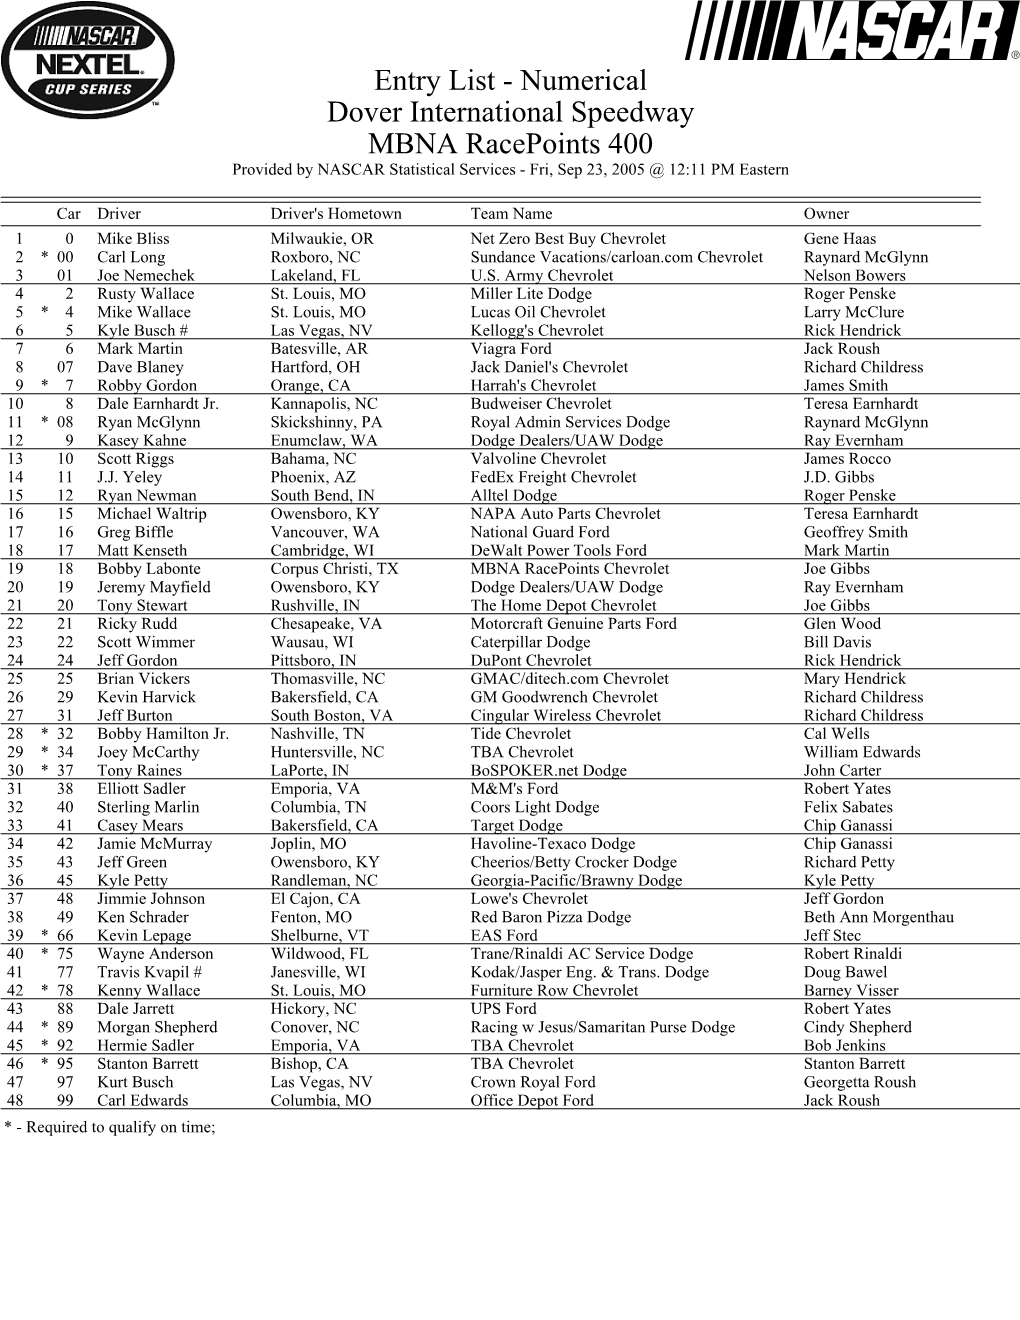 Entry List - Numerical Dover International Speedway MBNA Racepoints 400 Provided by NASCAR Statistical Services - Fri, Sep 23, 2005 @ 12:11 PM Eastern